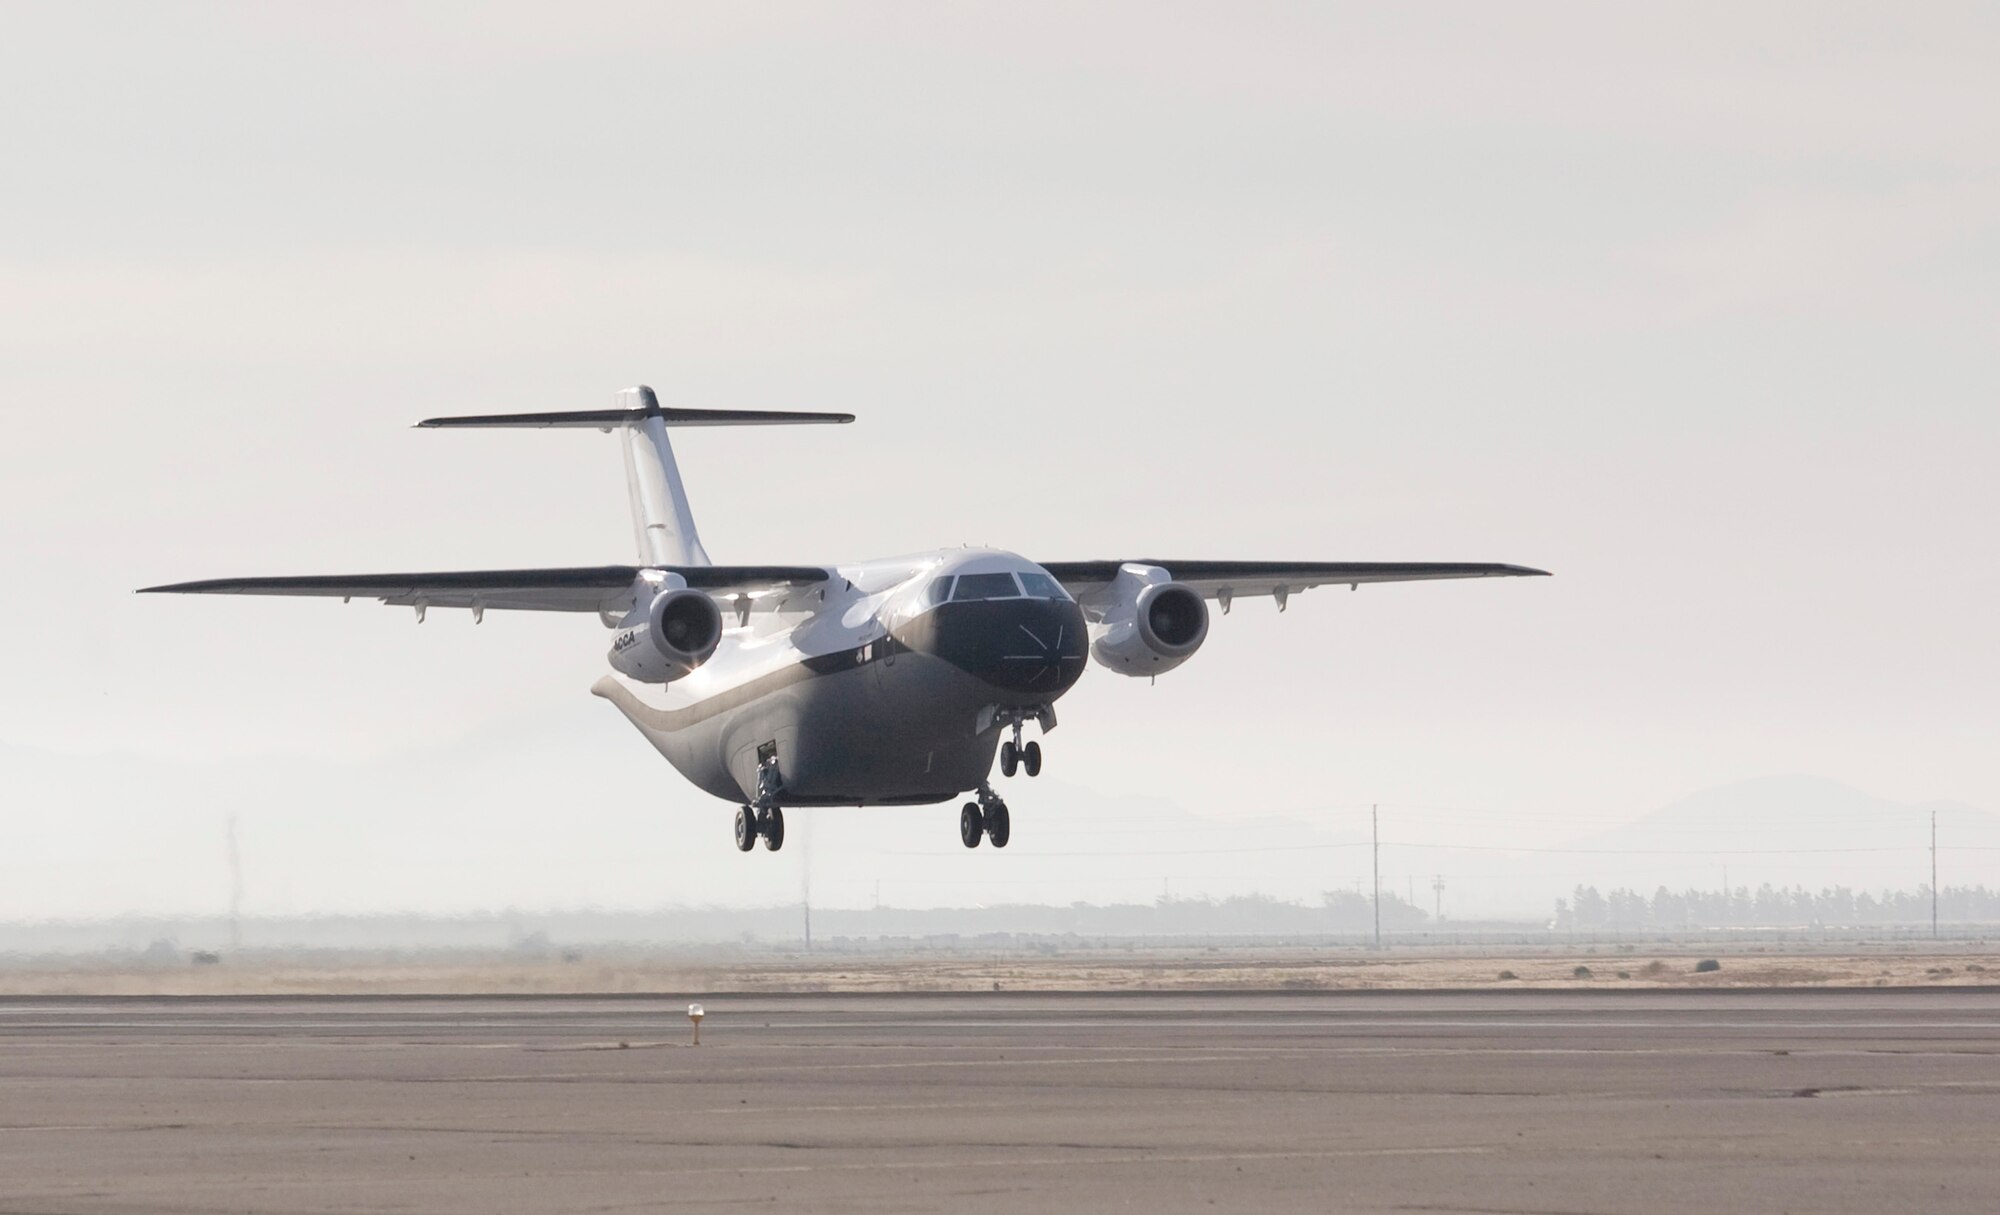 The Advanced Composite Cargo Aircraft made its first test flight June 2 from Air Force Plant 42 in Palmdale, Calif. The ACCA is proof of concept technology demonstrator for advanced composite manufacturing processes in a full-scale, certified aircraft. It was developed by Air Force Research Laboratory and Lockheed Martin officials. (Courtesy photo) 